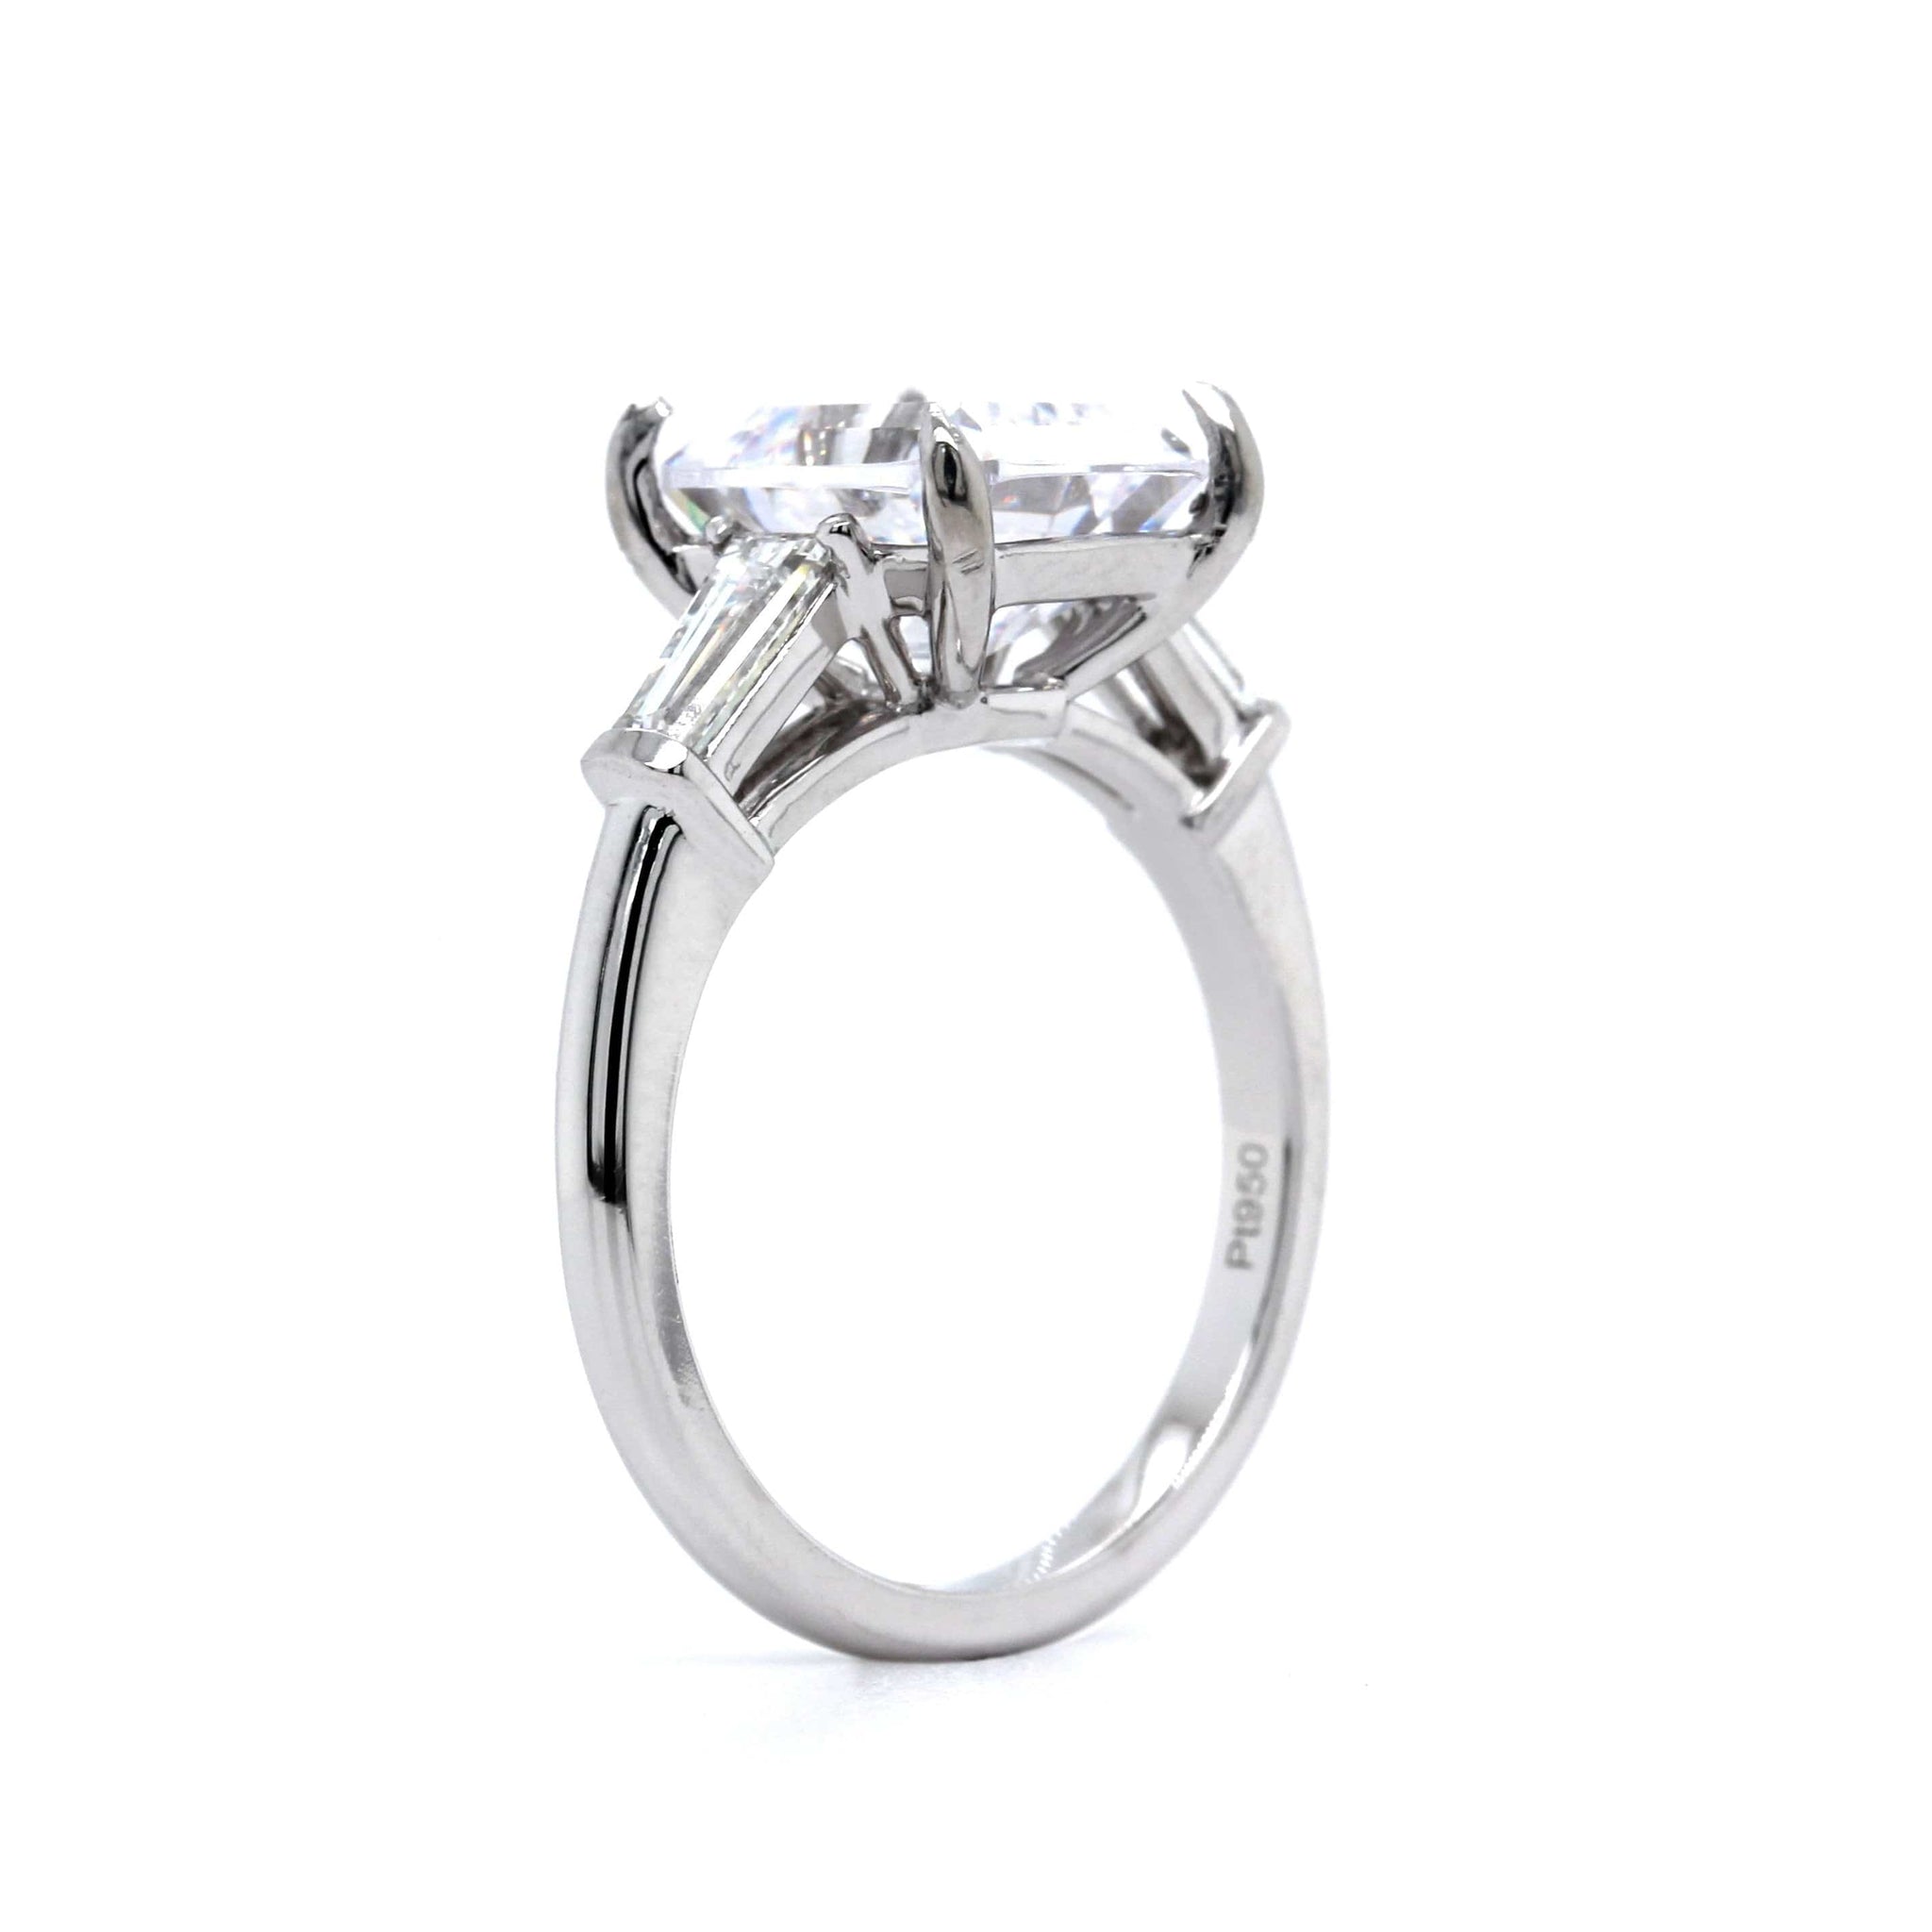 Platinum 3 Stone Emerald Cut Diamond with Tapered Sides Engagement Ring Setting